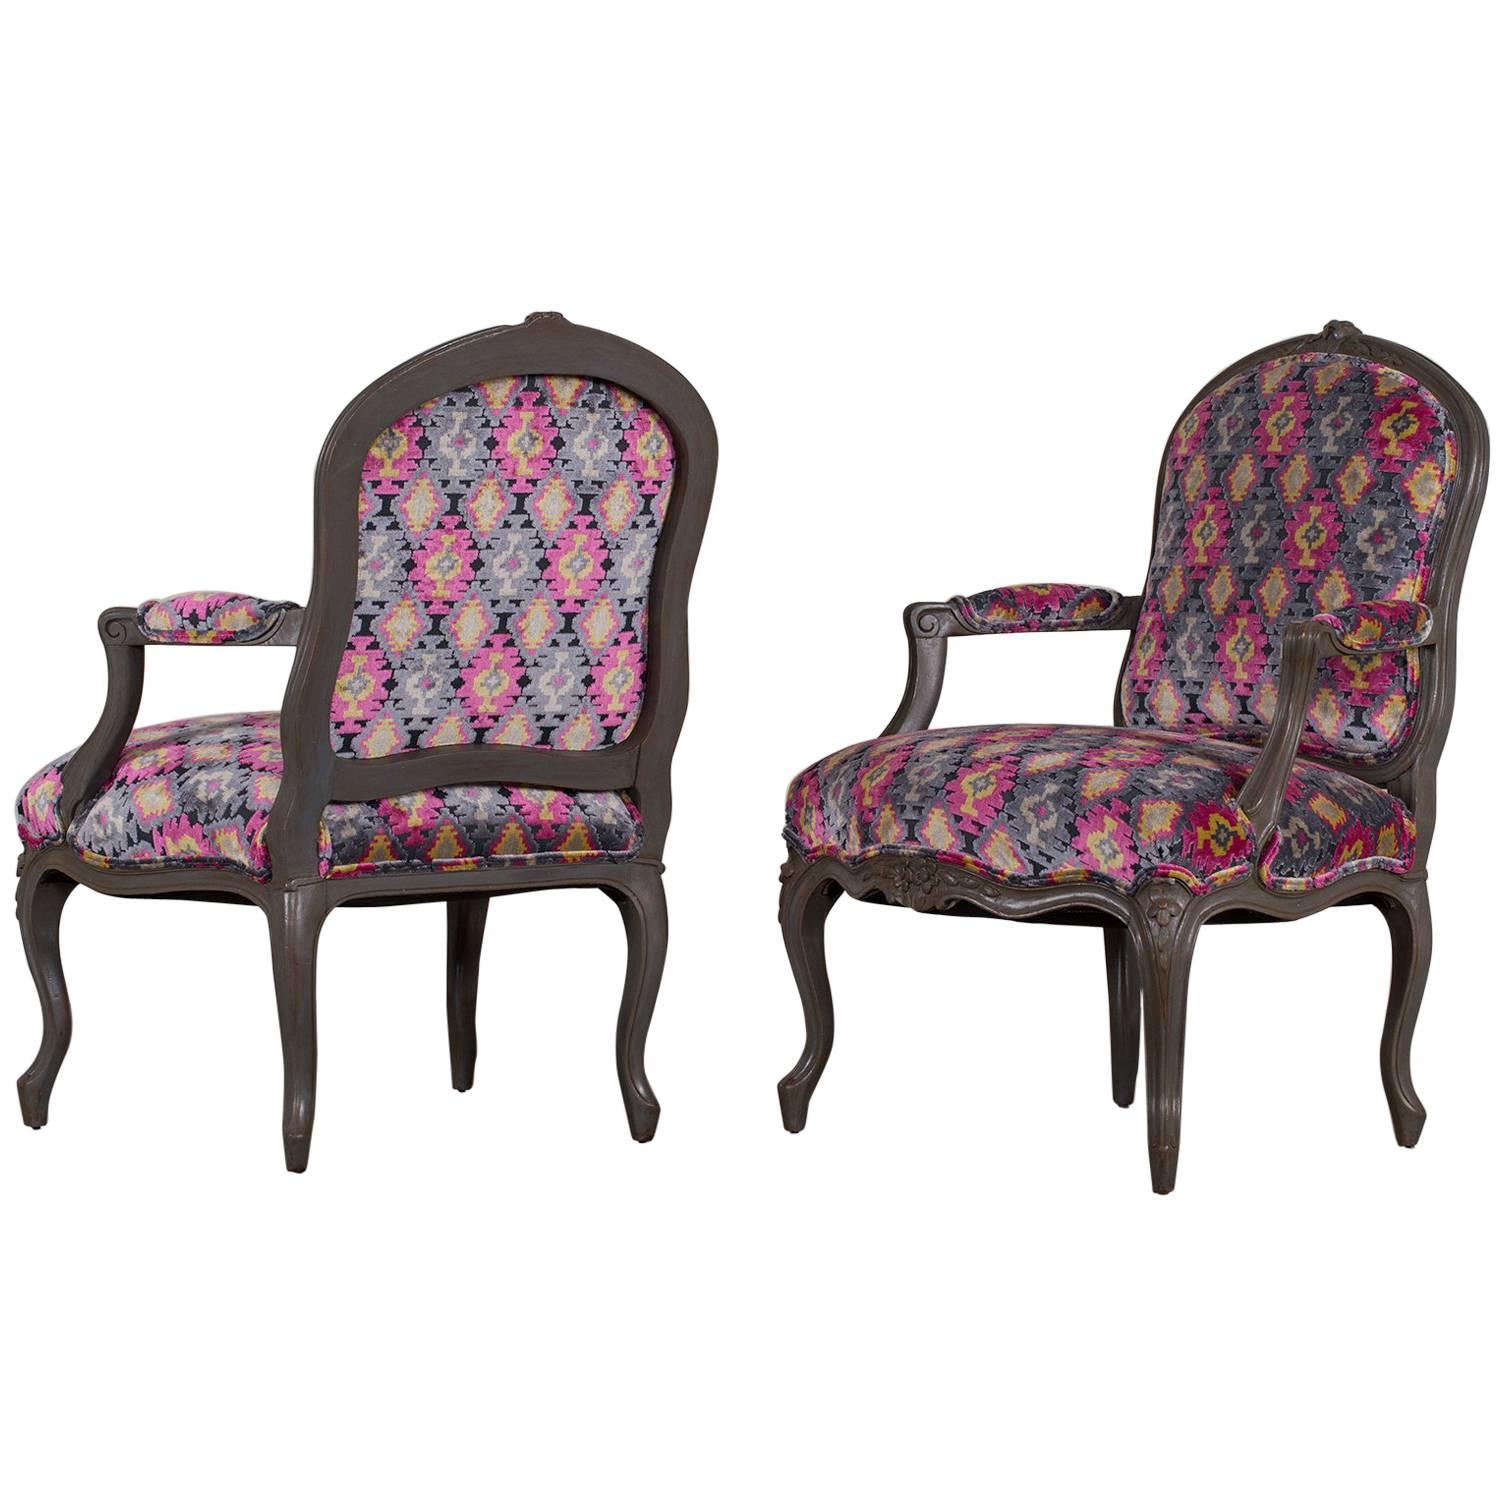 Pair of Antique French Louis XV Style Painted Armchairs, circa 1875